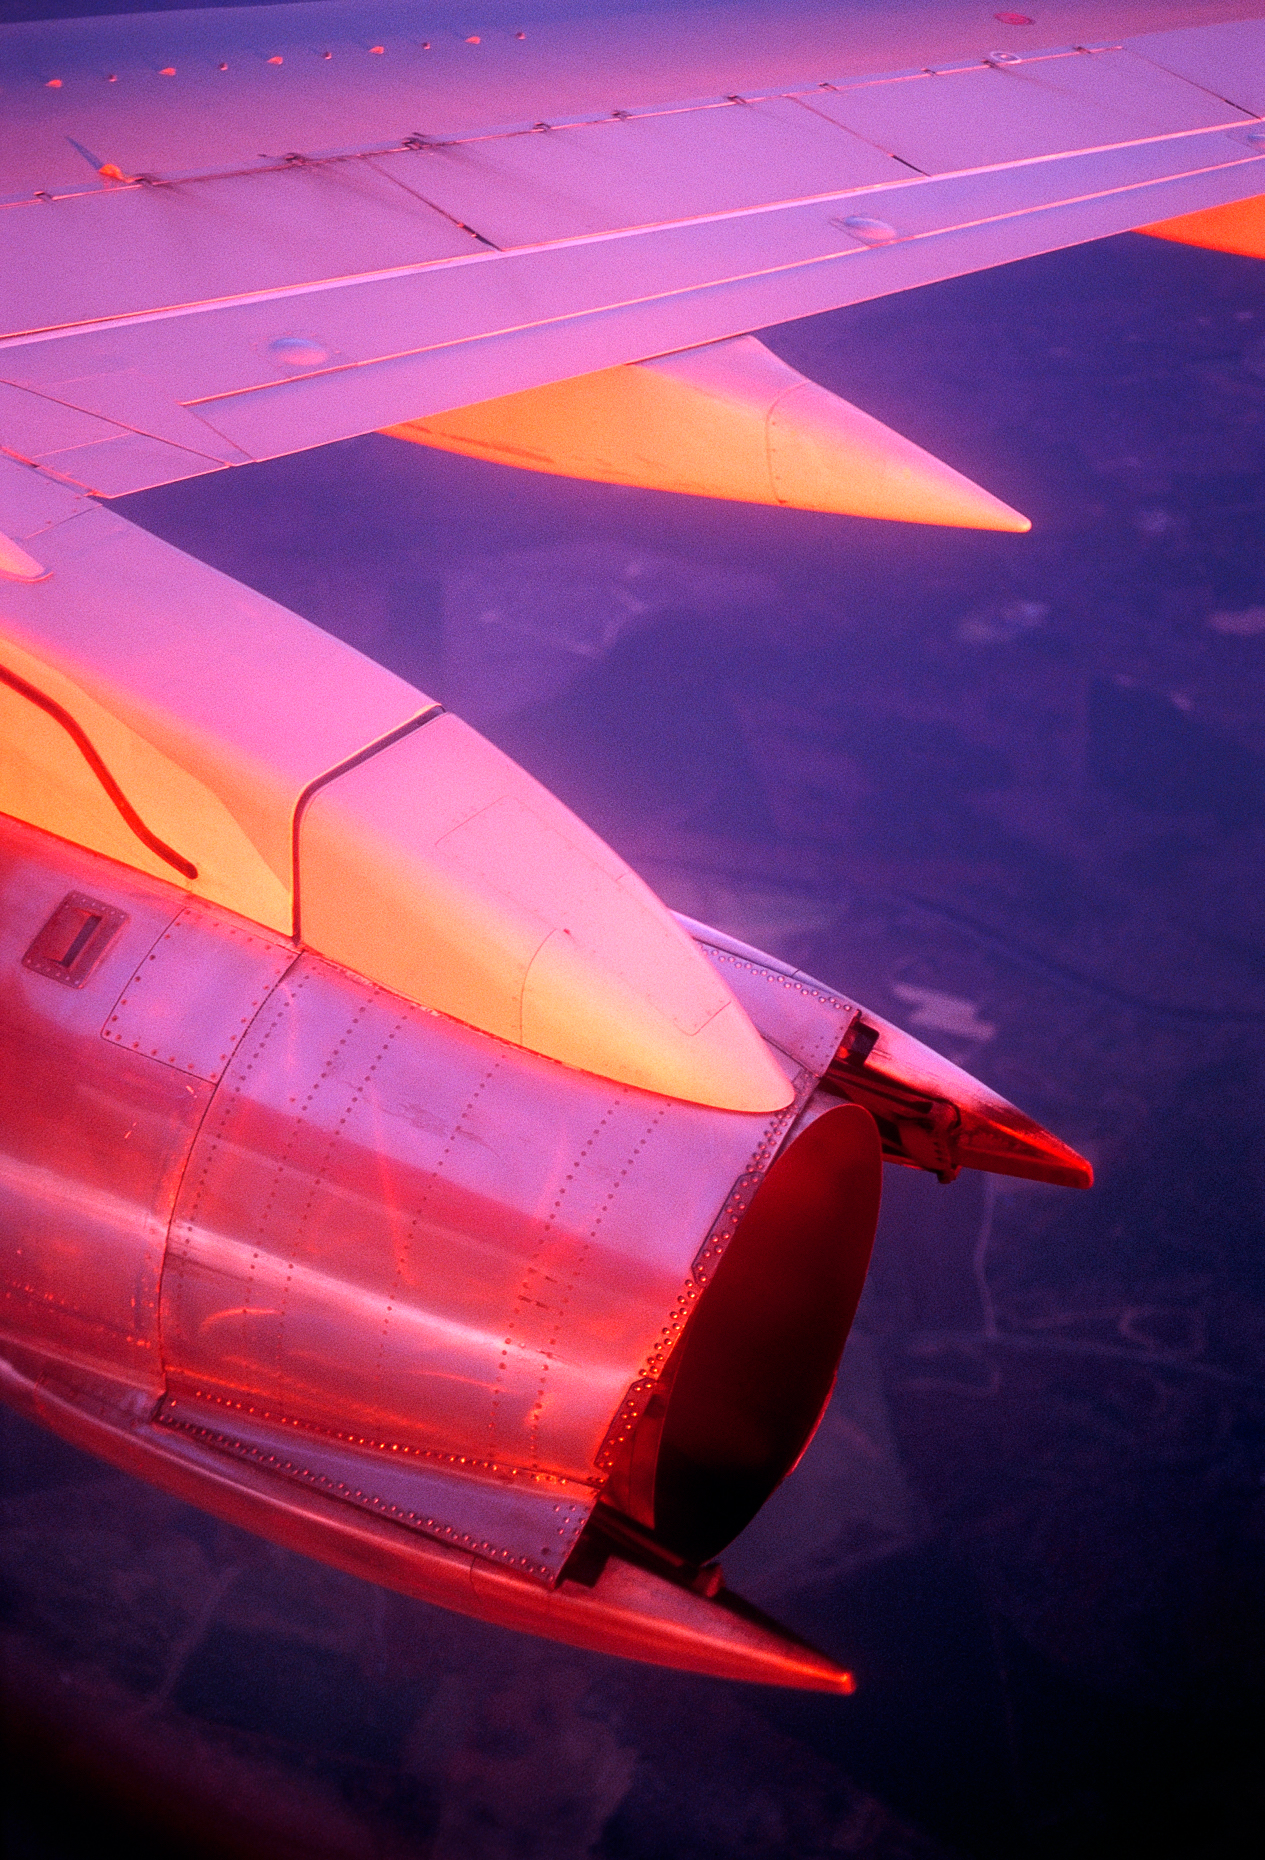 Setting sun illuminates the wing and jet engine of a commercial 